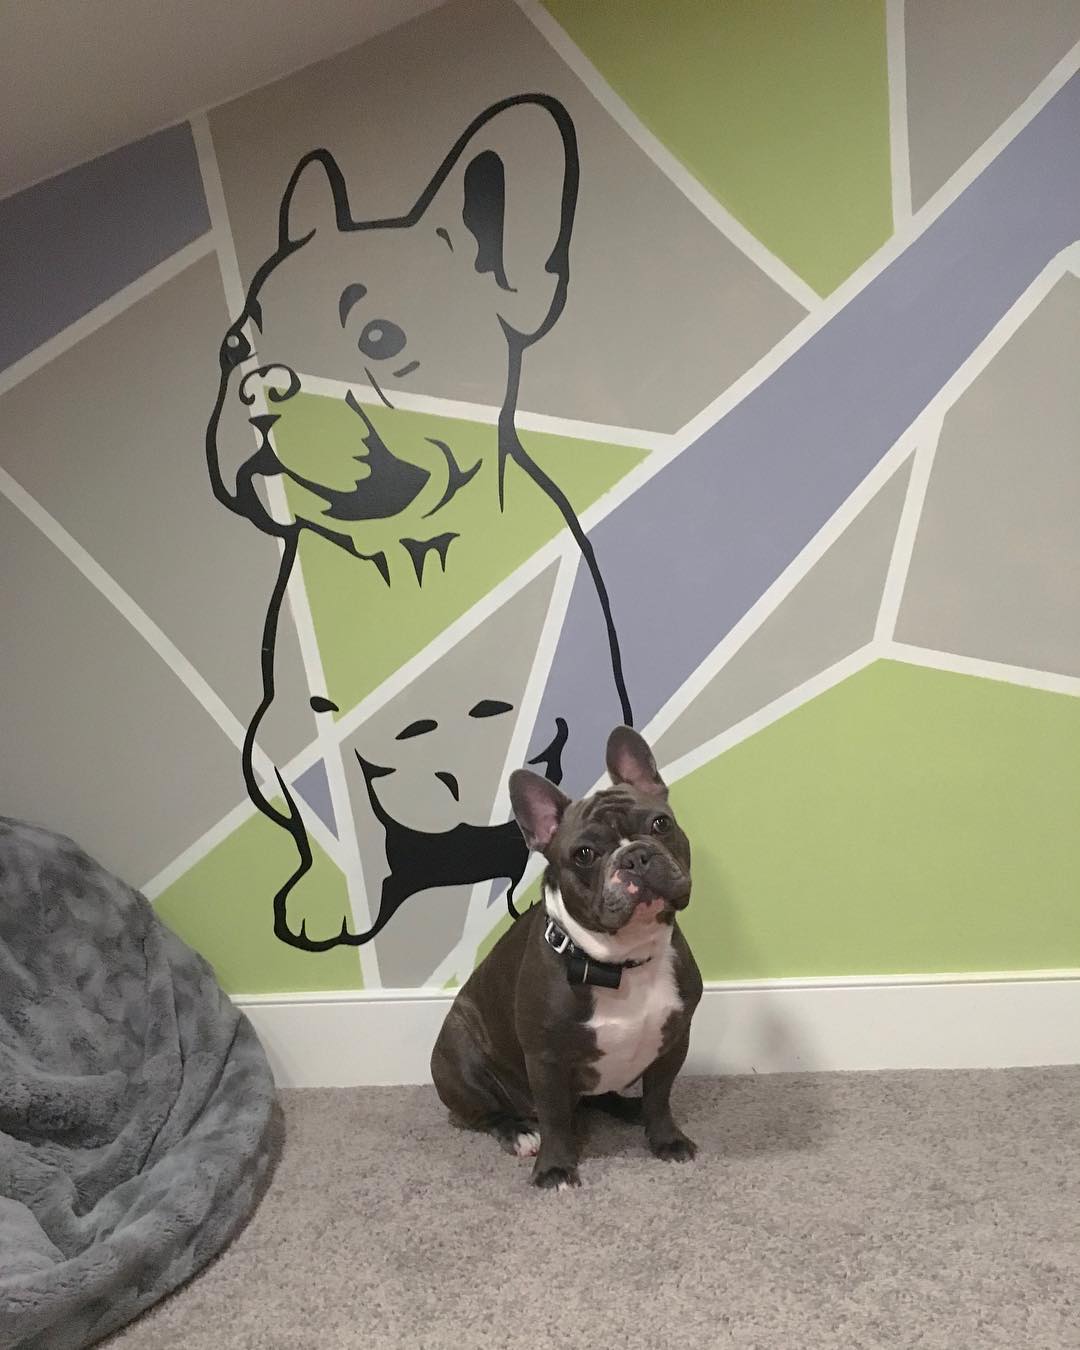 Wall Painted with the Likeness of French Bulldog. Photo by Instagram user @frencholive01